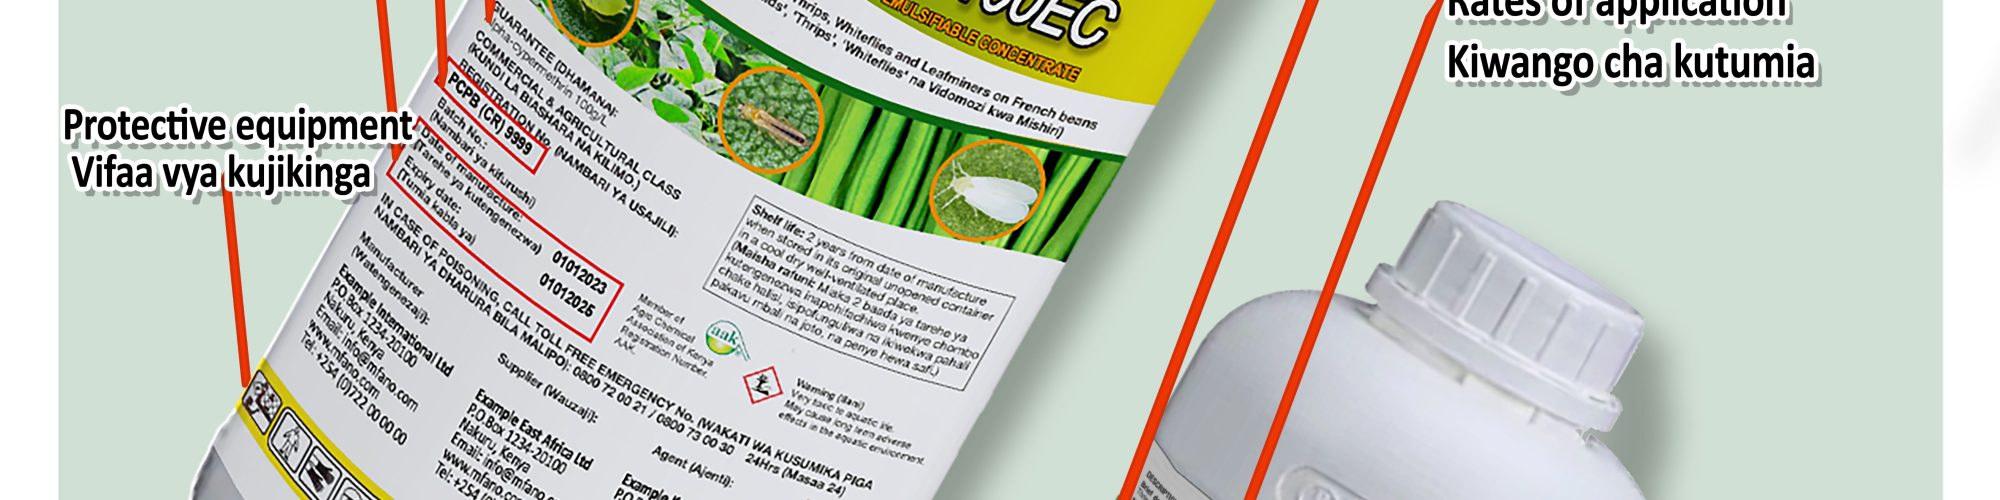 Key information on Pest Control Products Products Labels